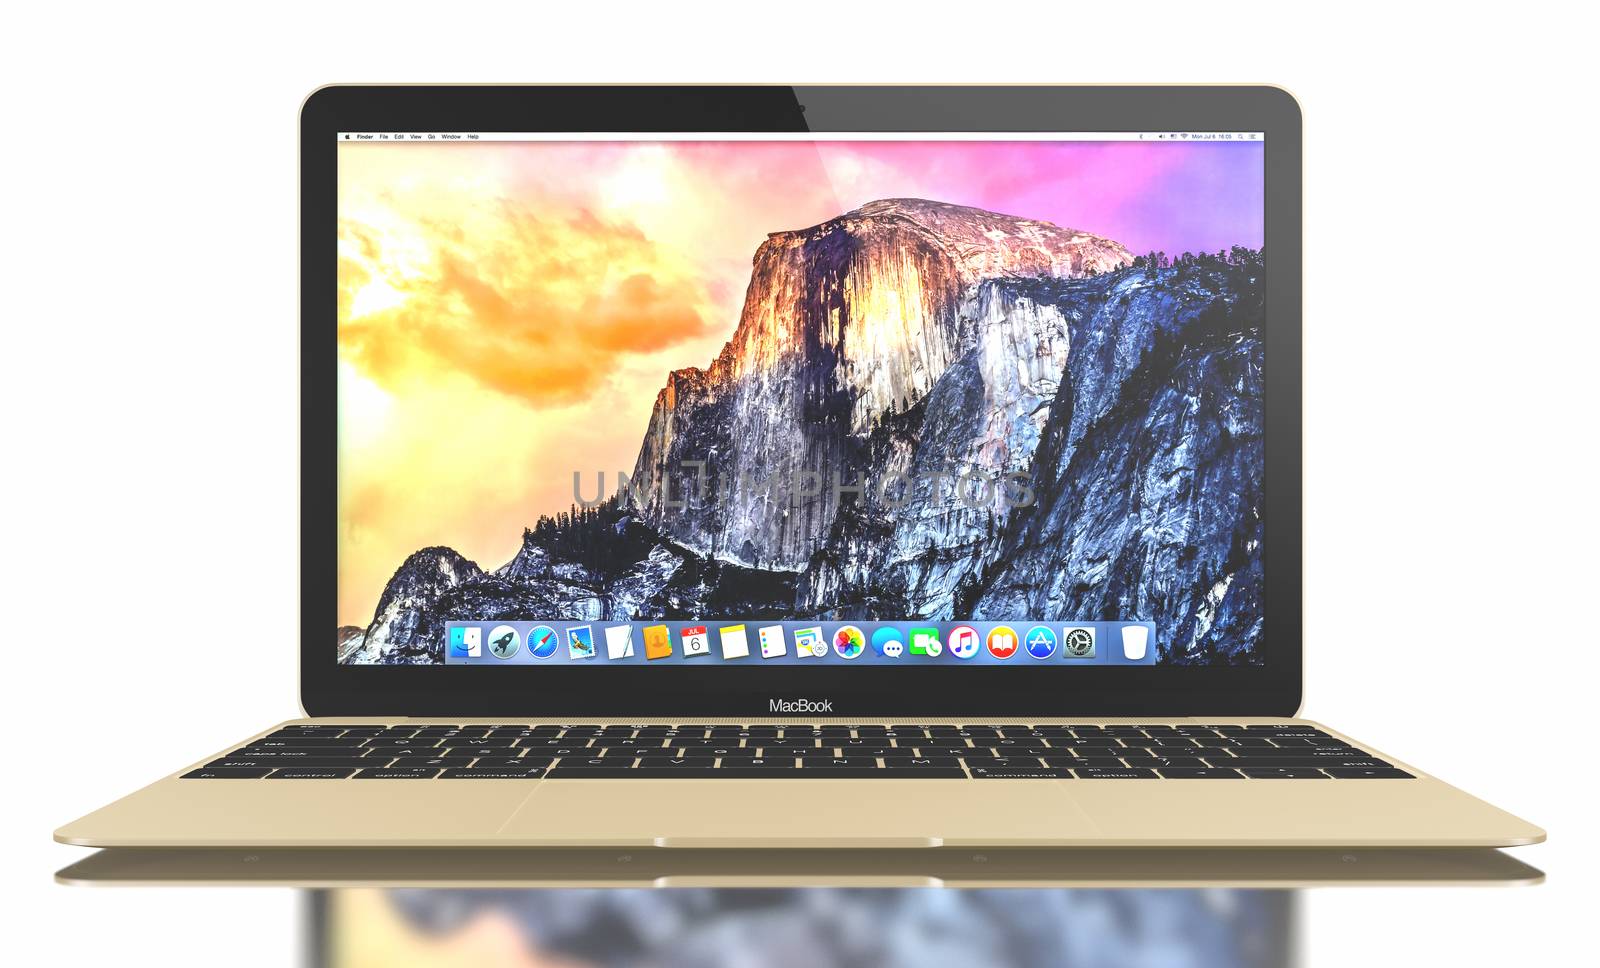 Galati, Romania - July 10, 2015: New Gold MacBook displaying OS X Yosemite. The New MacBook is not only Apple's thinnest and lightest, but more functional and intuitive than ever before. It has a 12-inch Retina display with a resolution of 2304 x 1440. The new MacBook was launched on April 10.